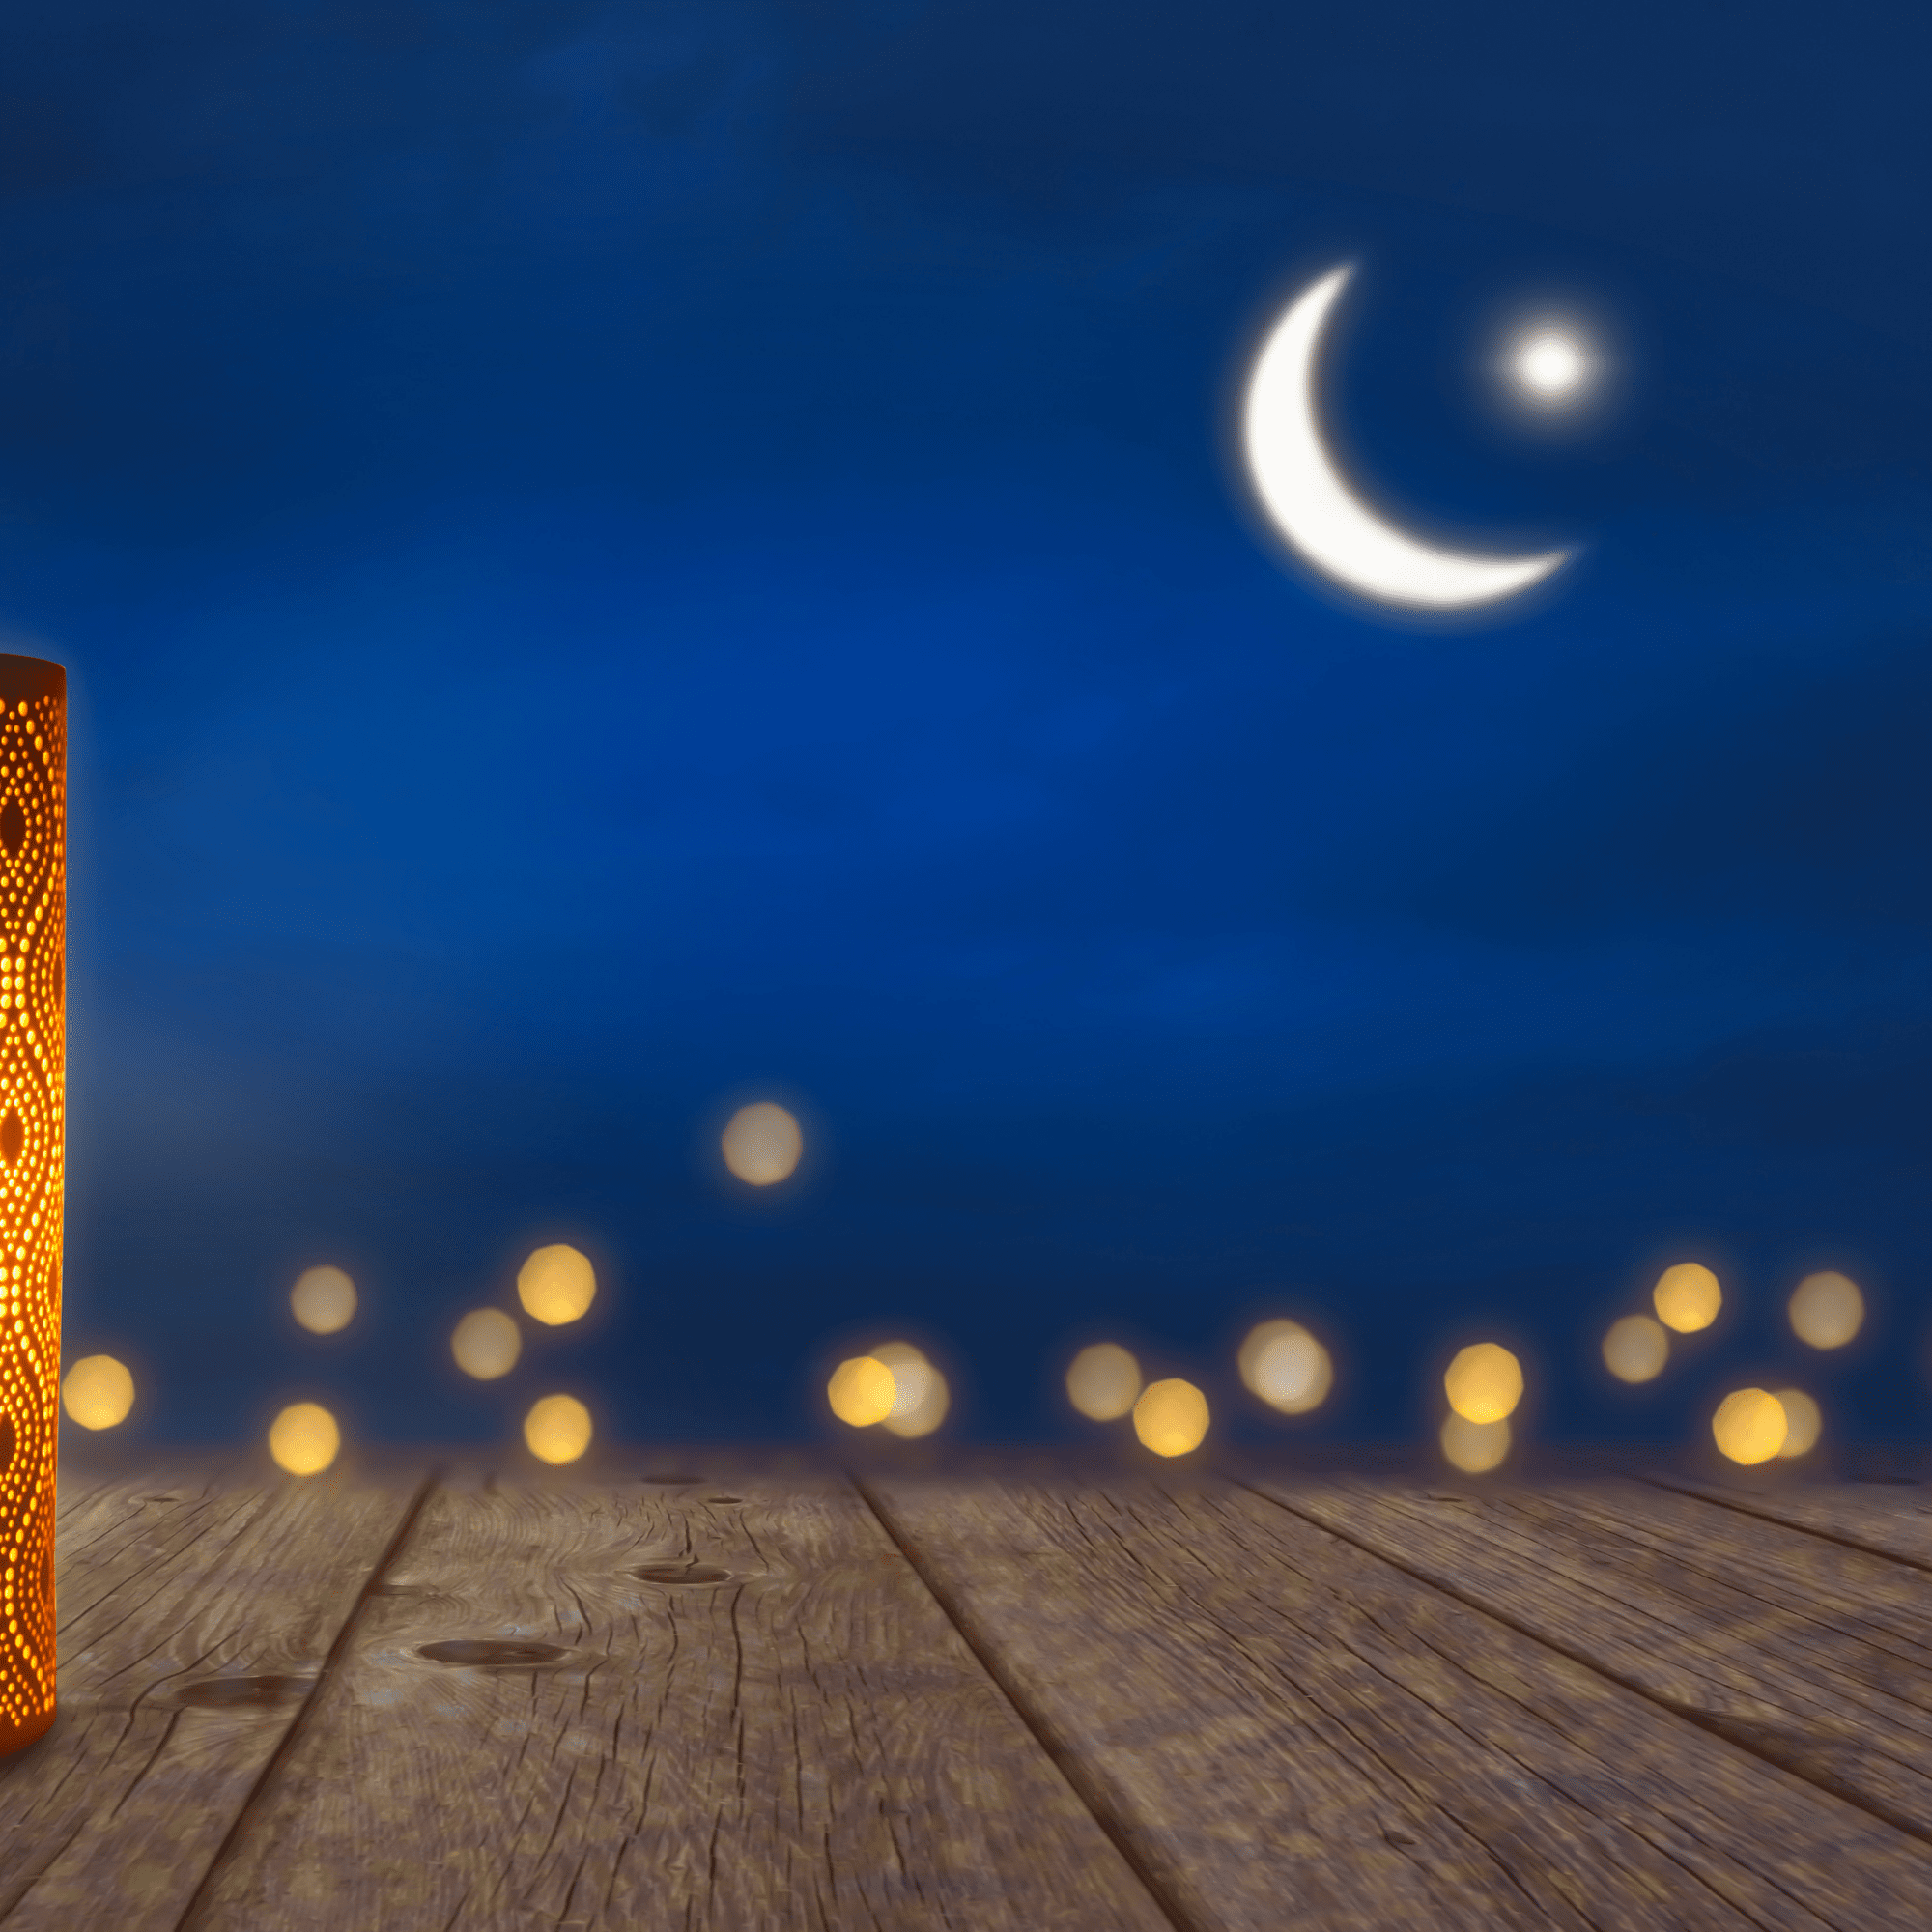 Why Muslims Fast During Ramadan?